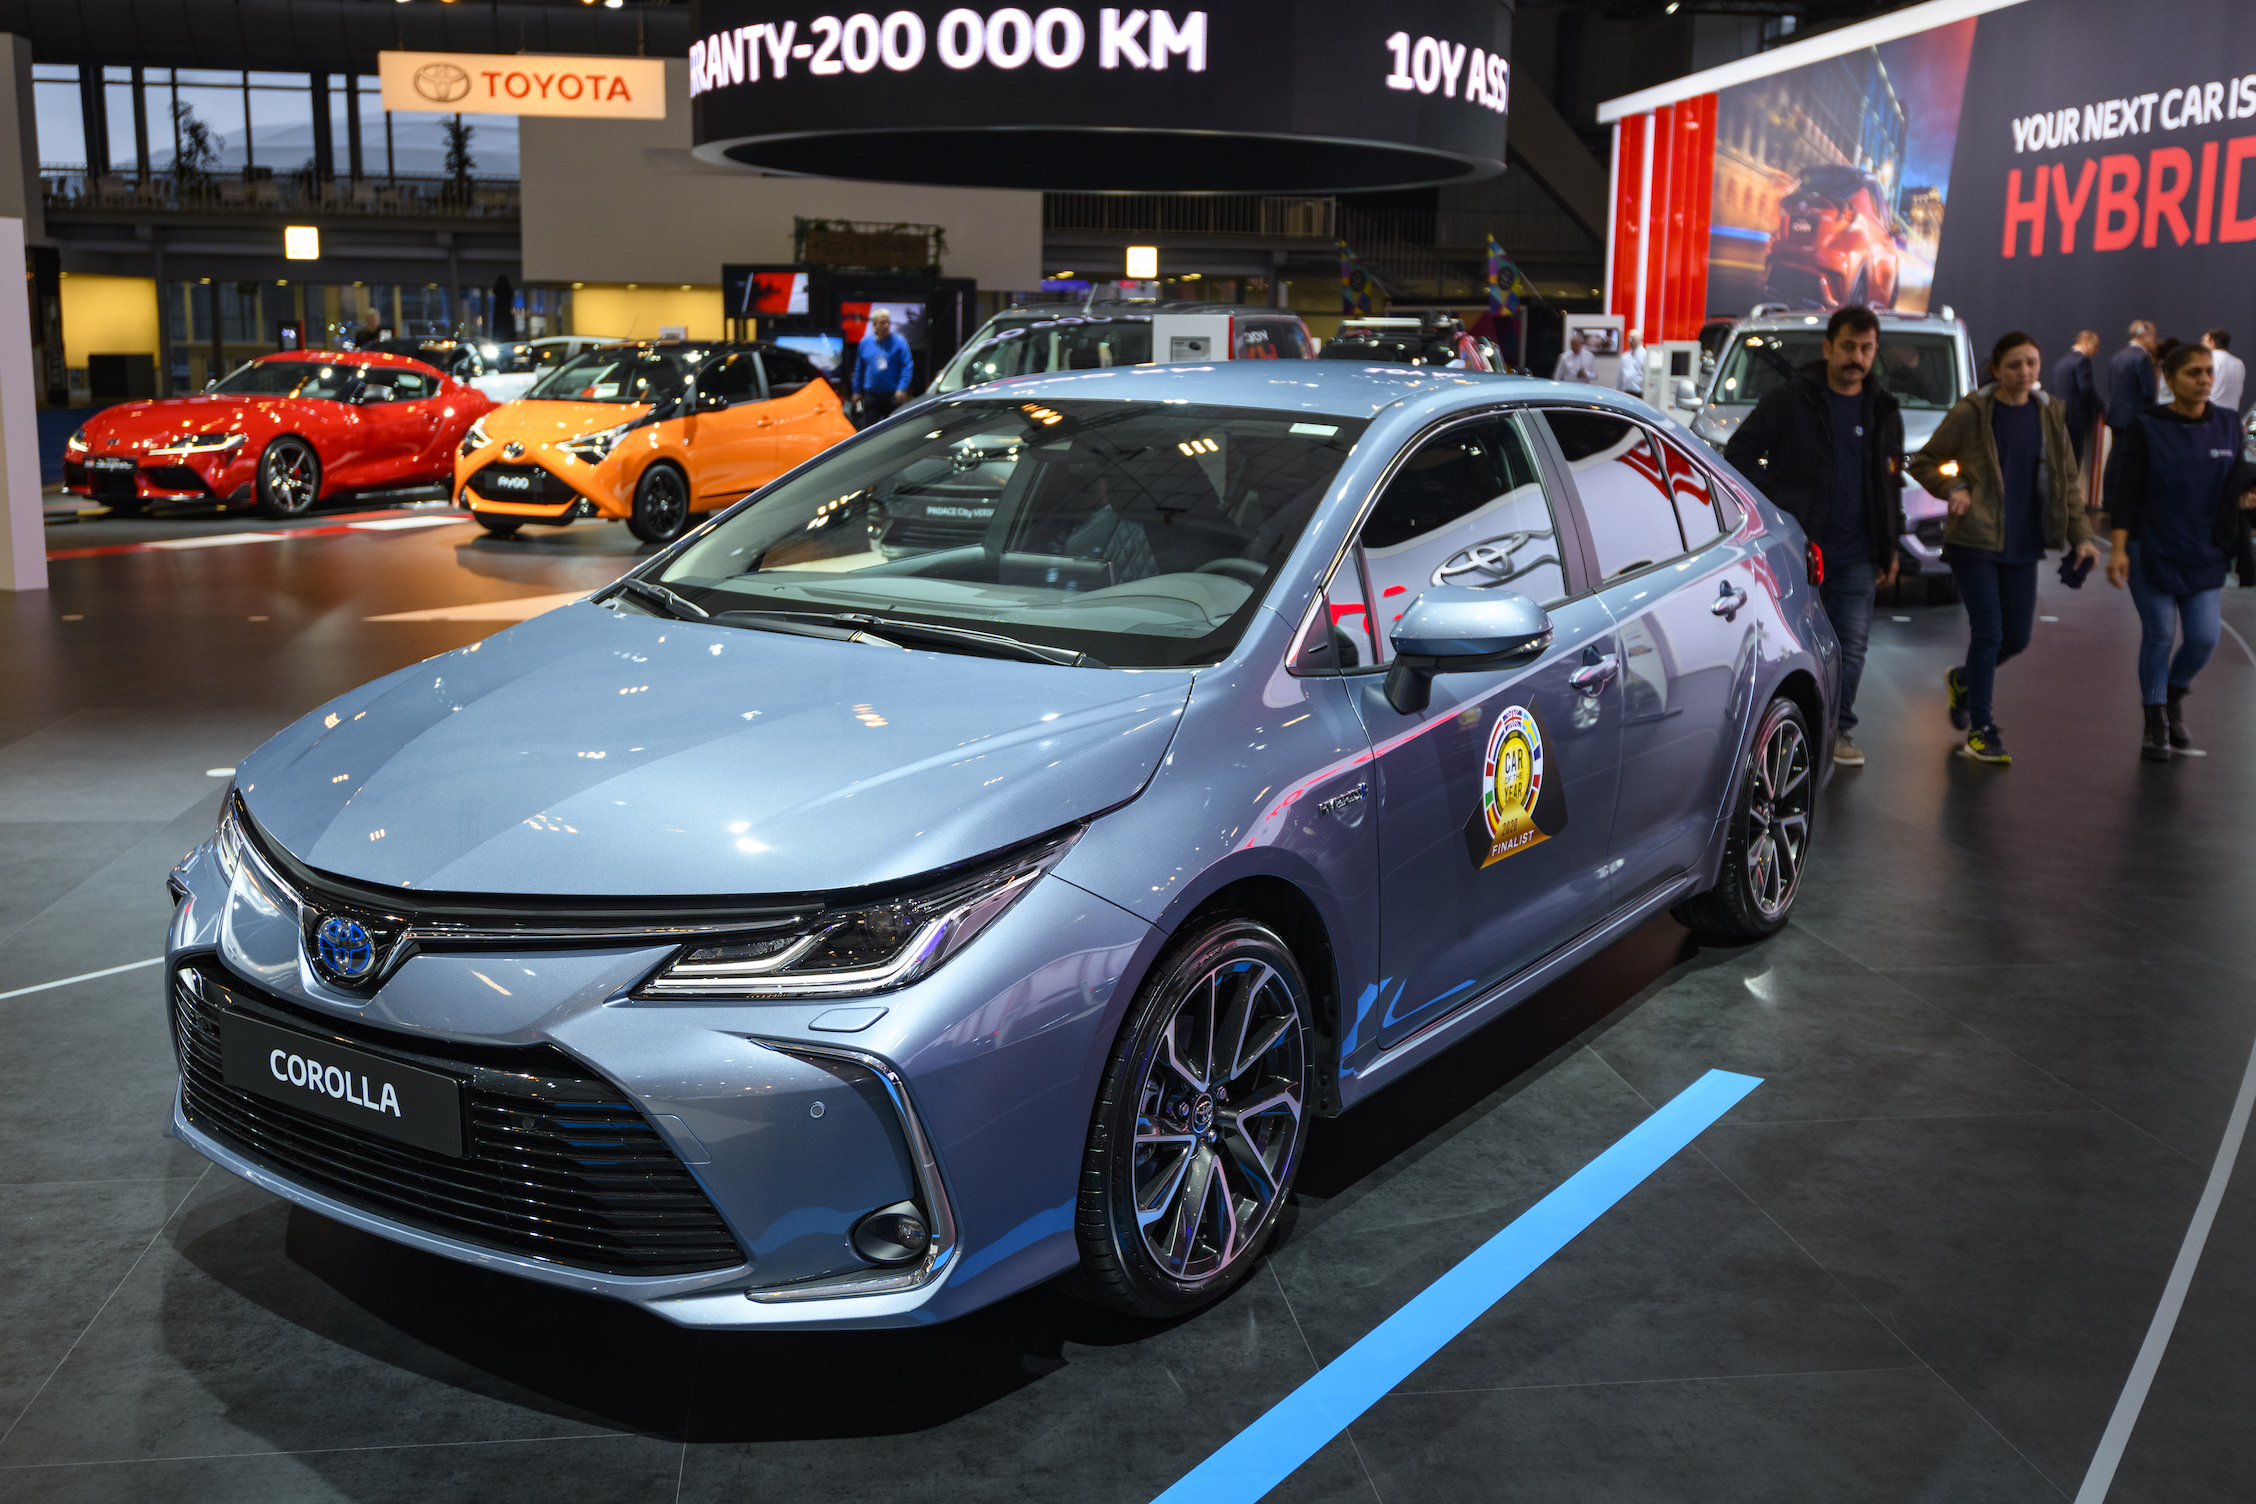 Toyota Corolla compact hatchback sedan on display at Brussels Expo